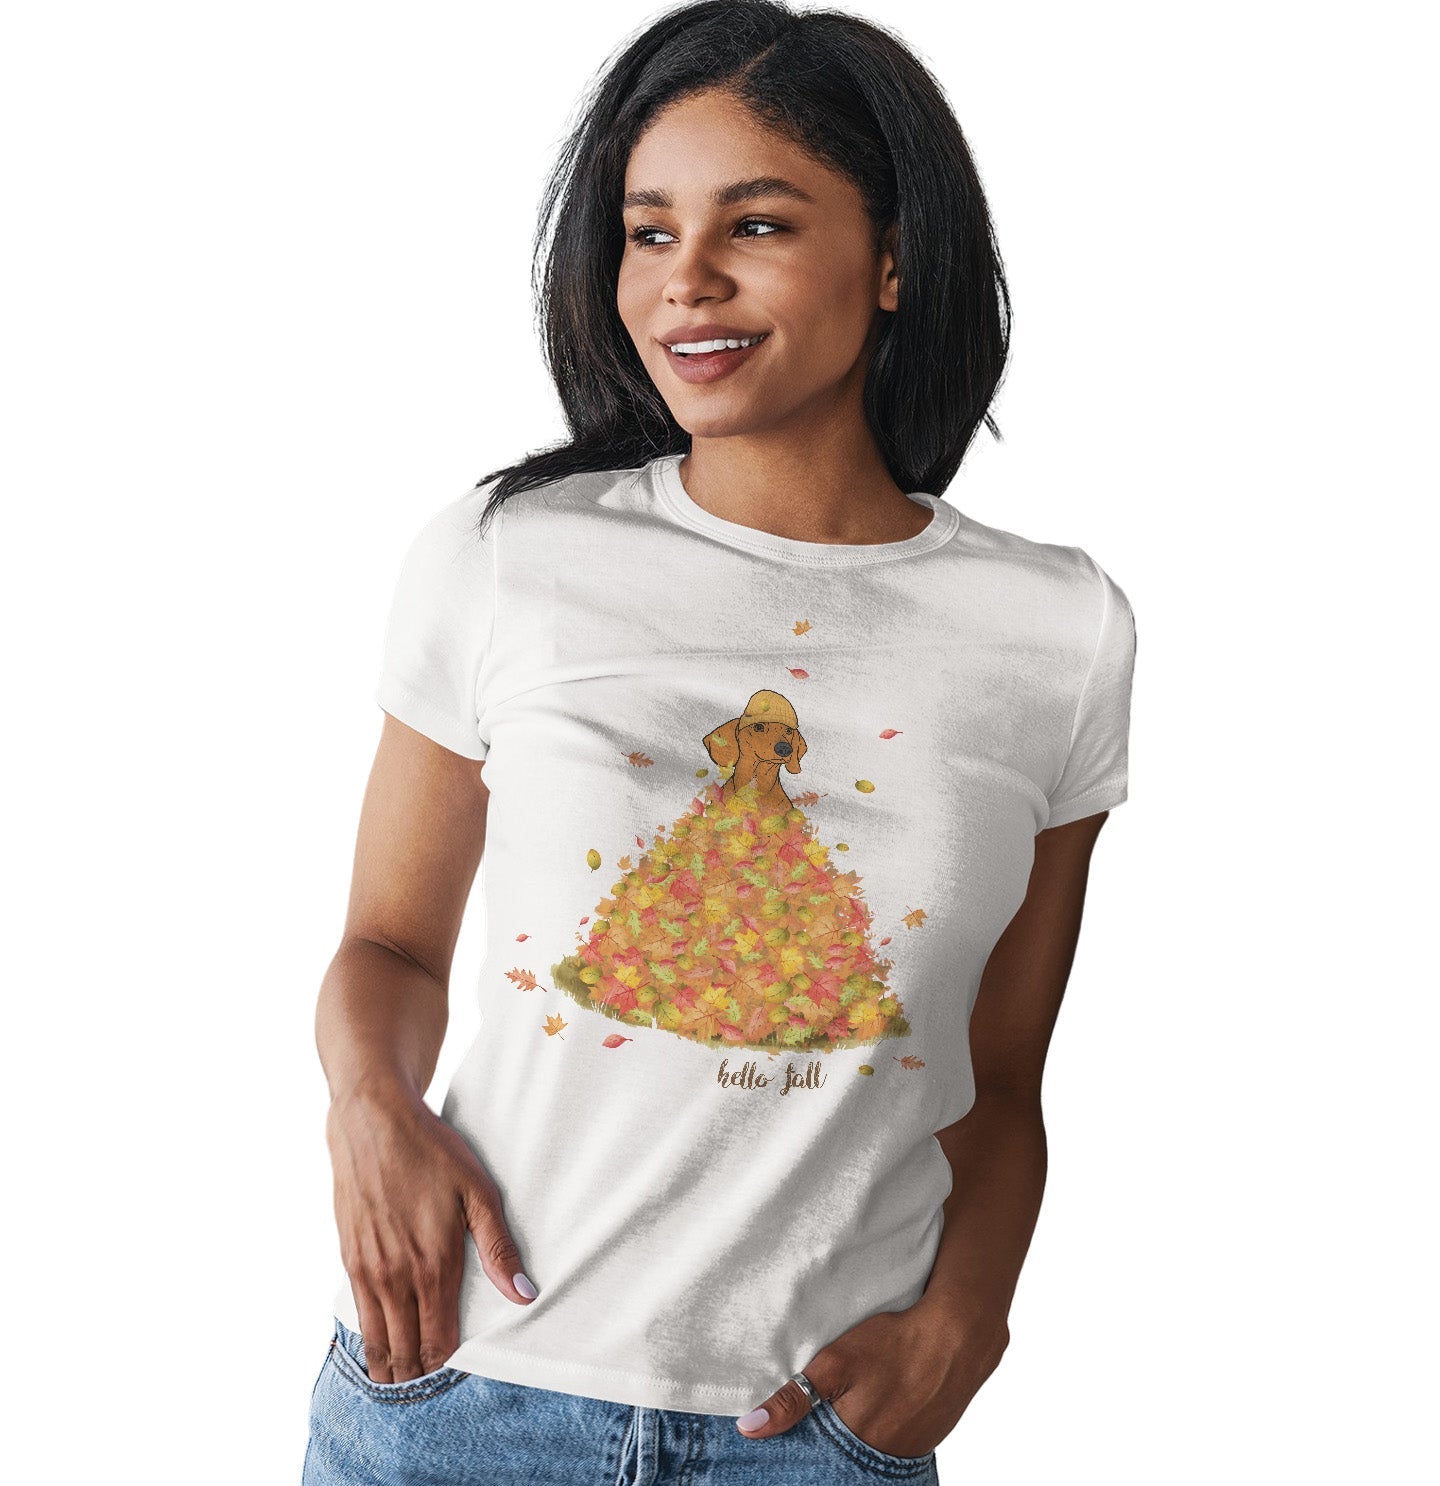 Leaf Pile and Dachshund - Women's Fitted T-Shirt